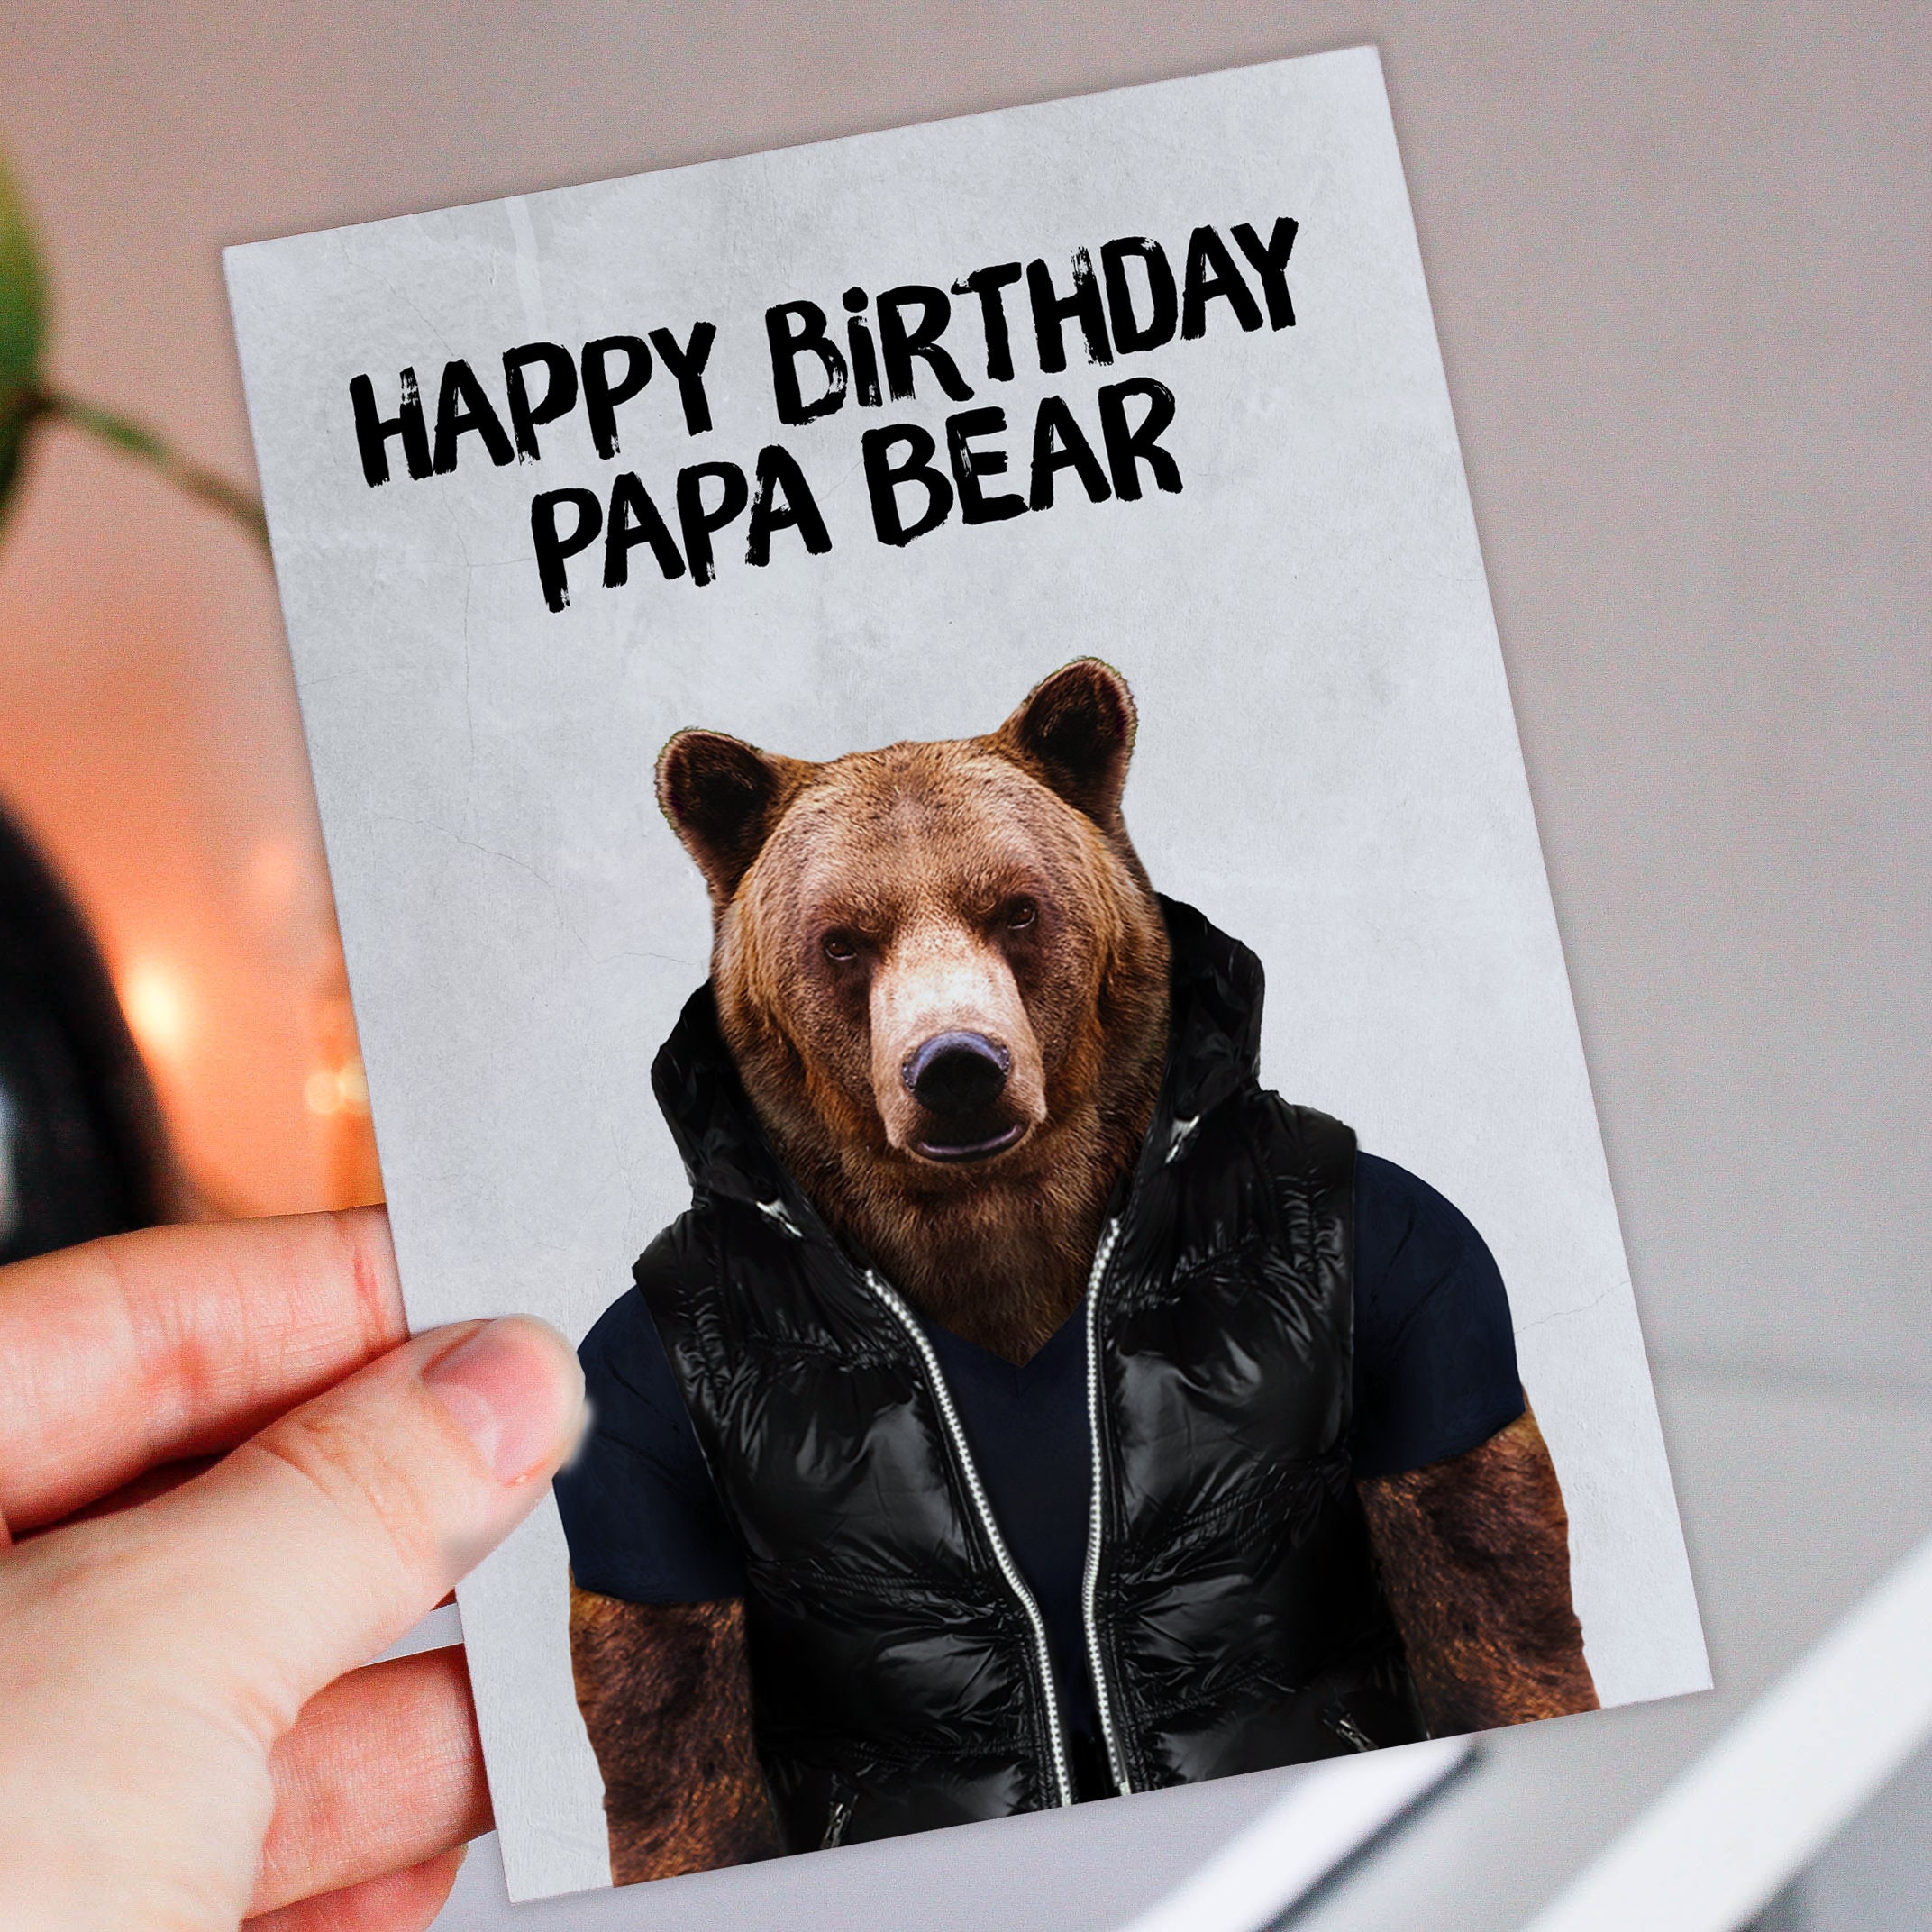 Happy Birthday Papa Bear Cute Animal in Clothes Birthday Card picture image